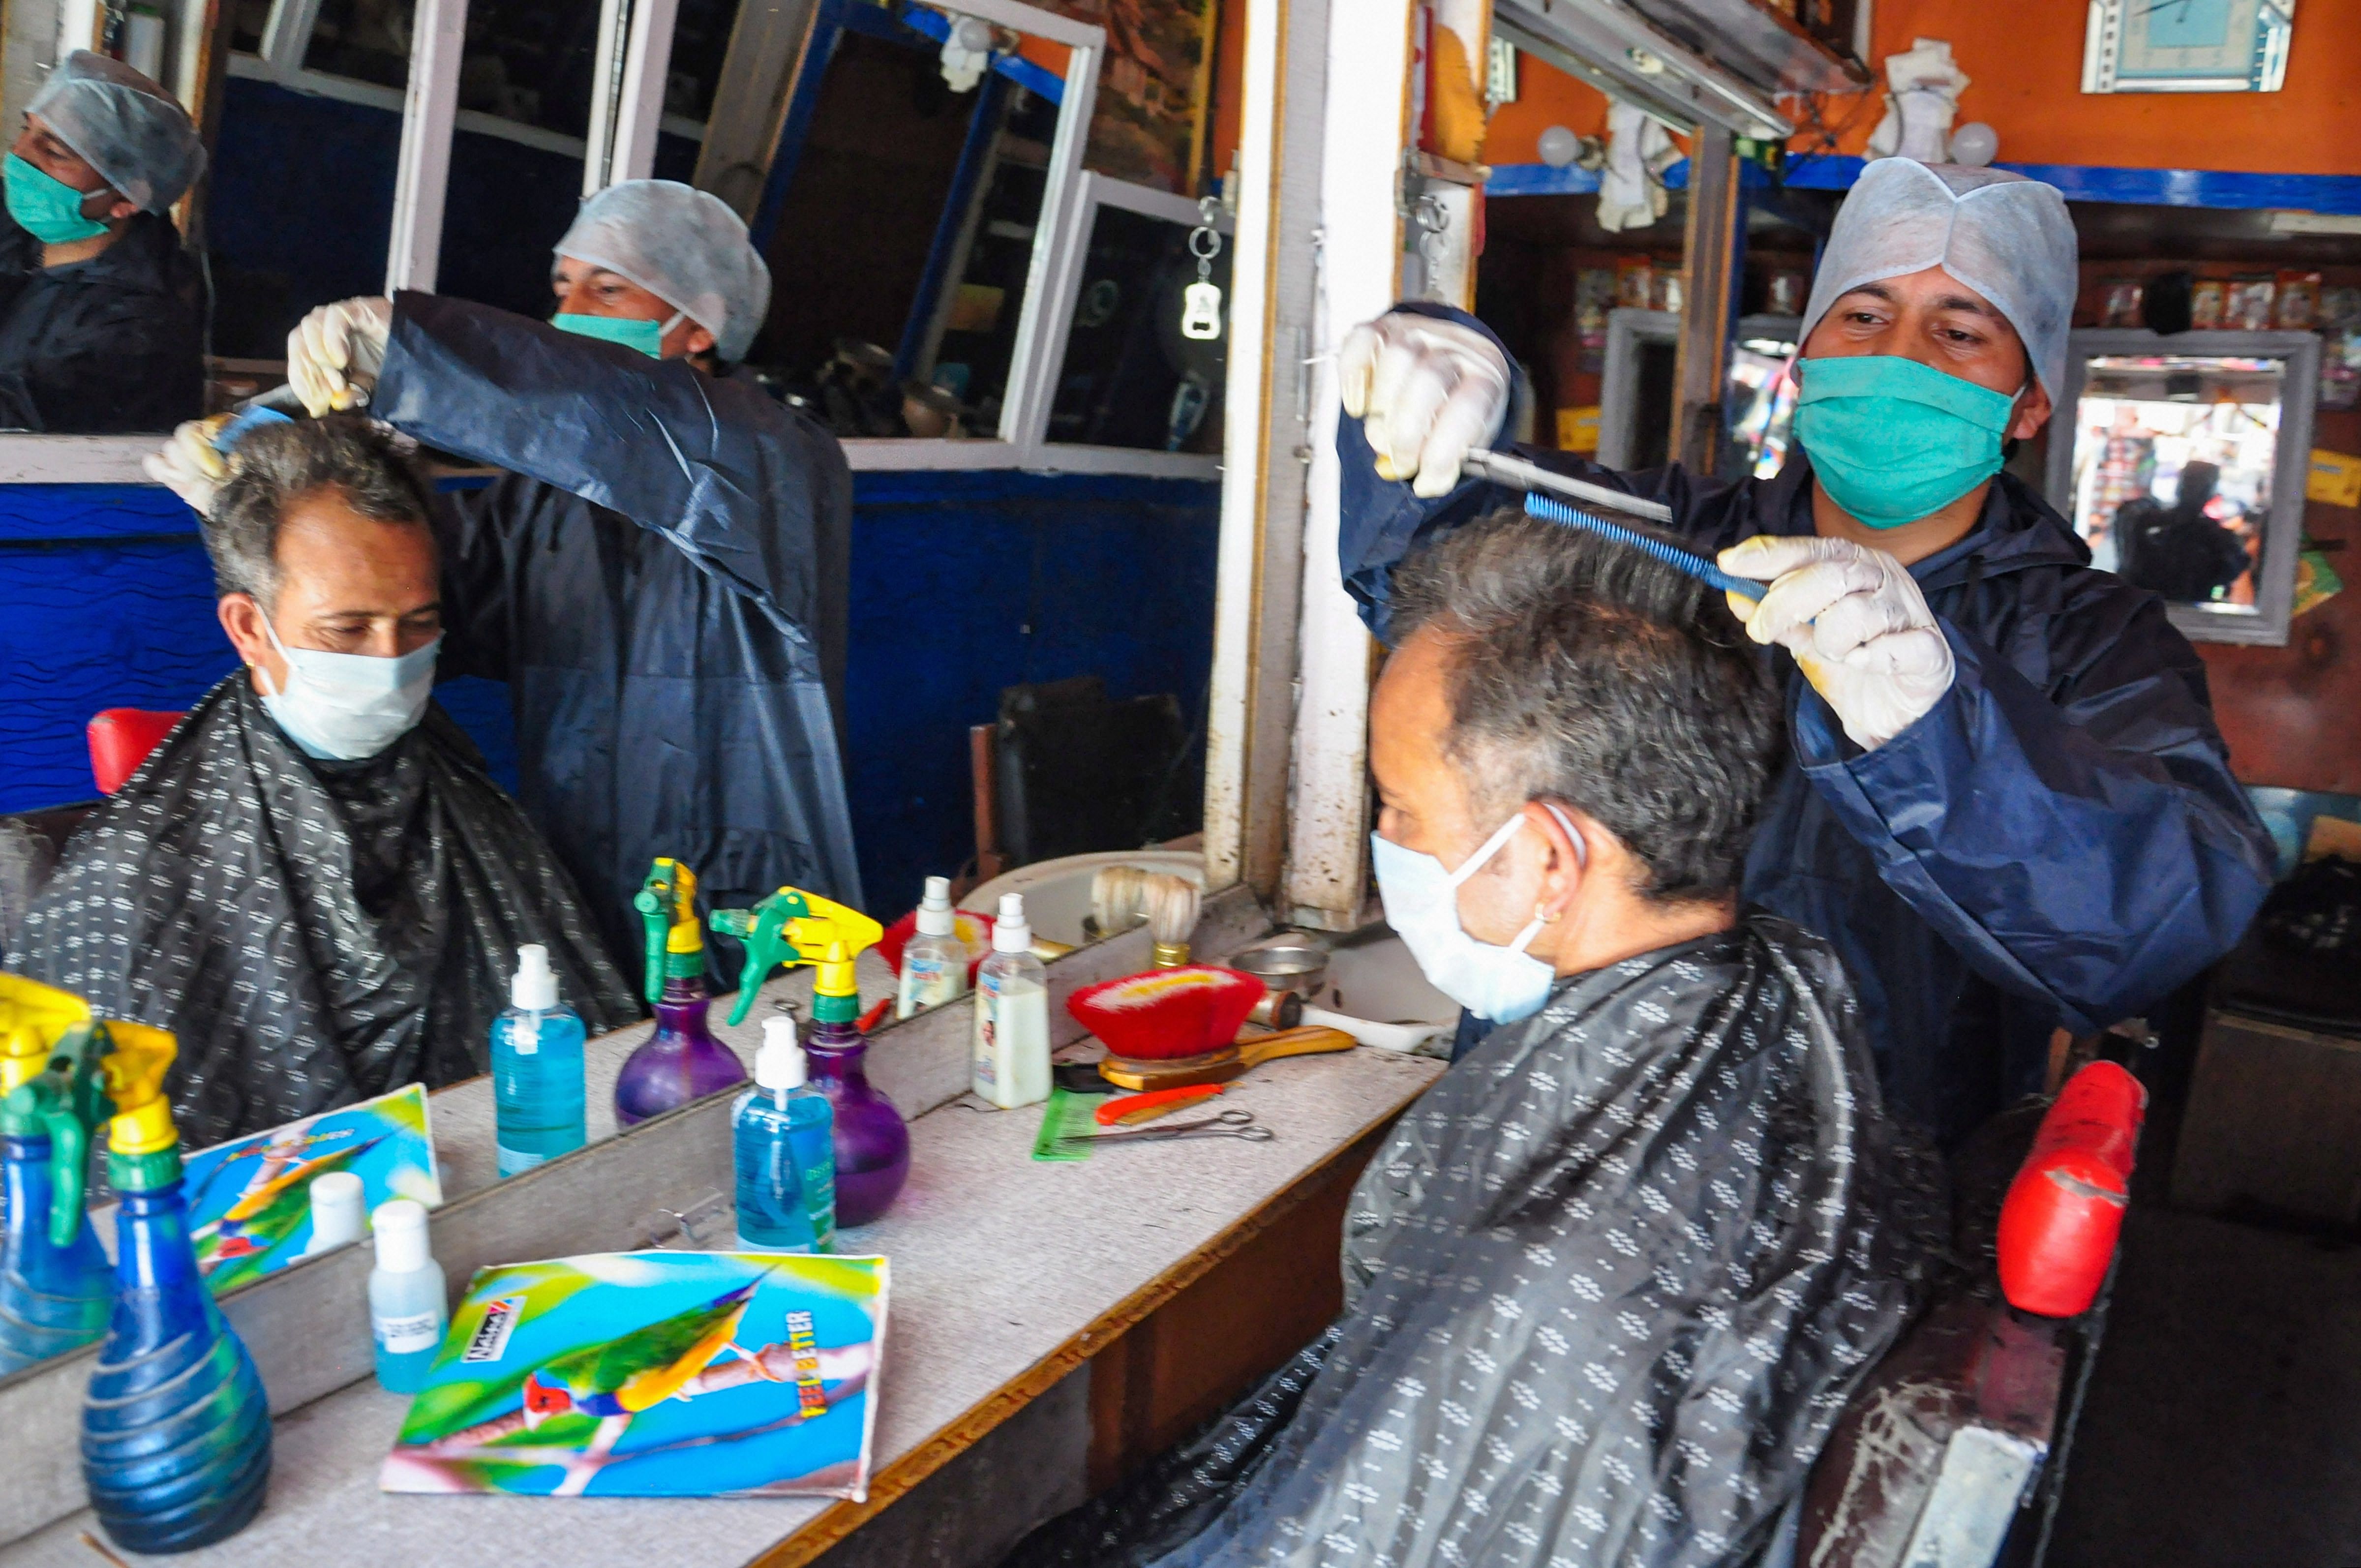  barber wearing a face mask attends to a customer at his salon, during the ongoing COVID-19 lockdown, in Kullu. (PTI Photo)